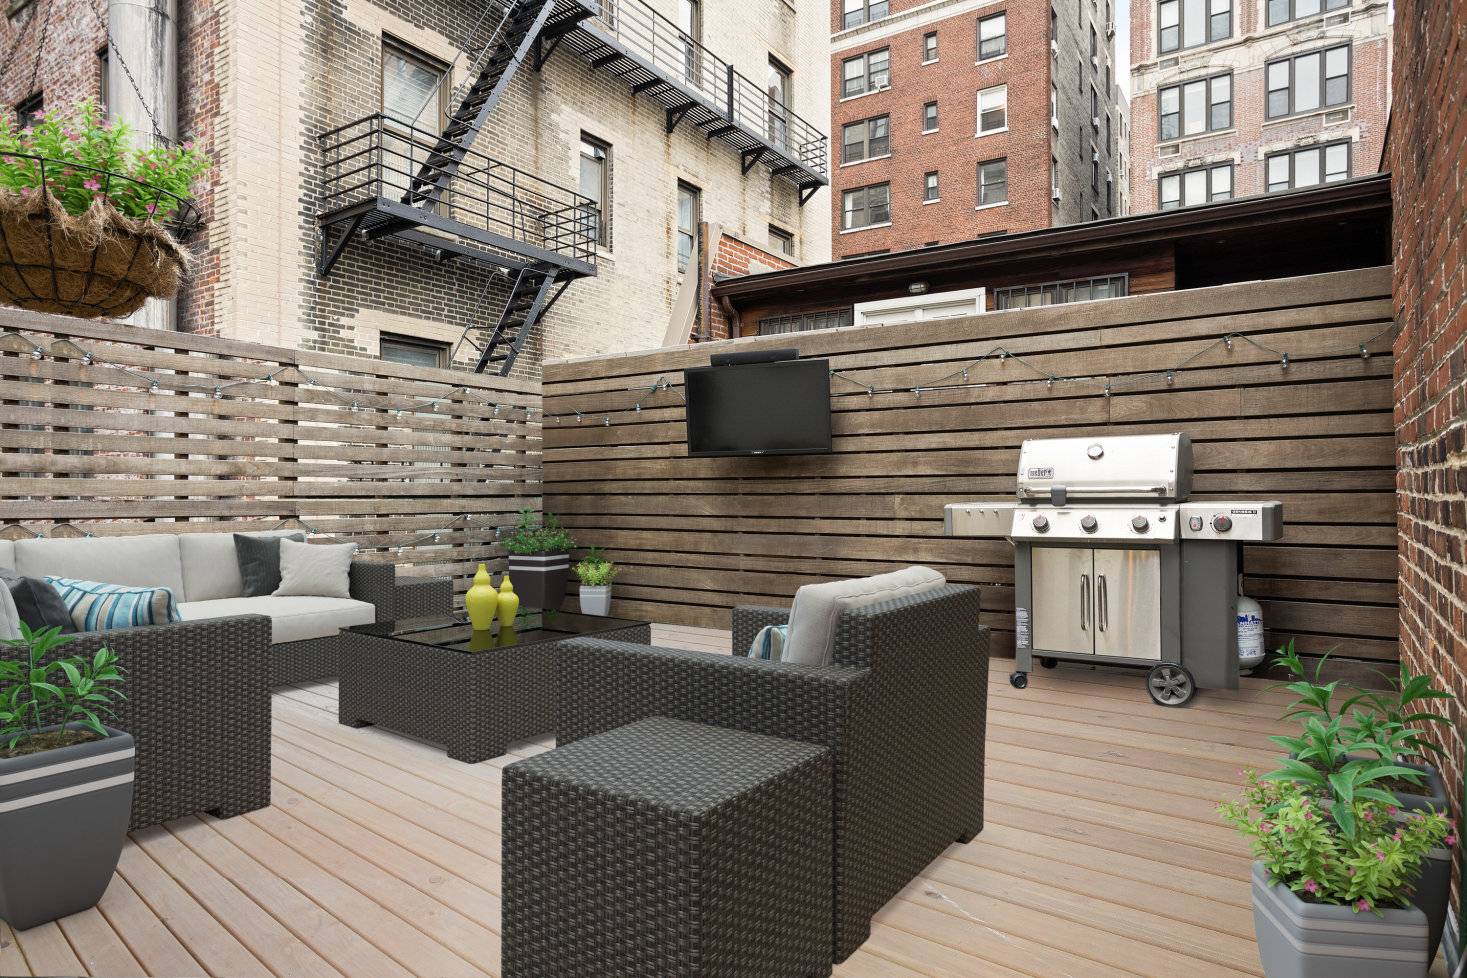 YOUR VERY OWN SLICE OF PARADISE IN THE THE HEART OF THE UWS !